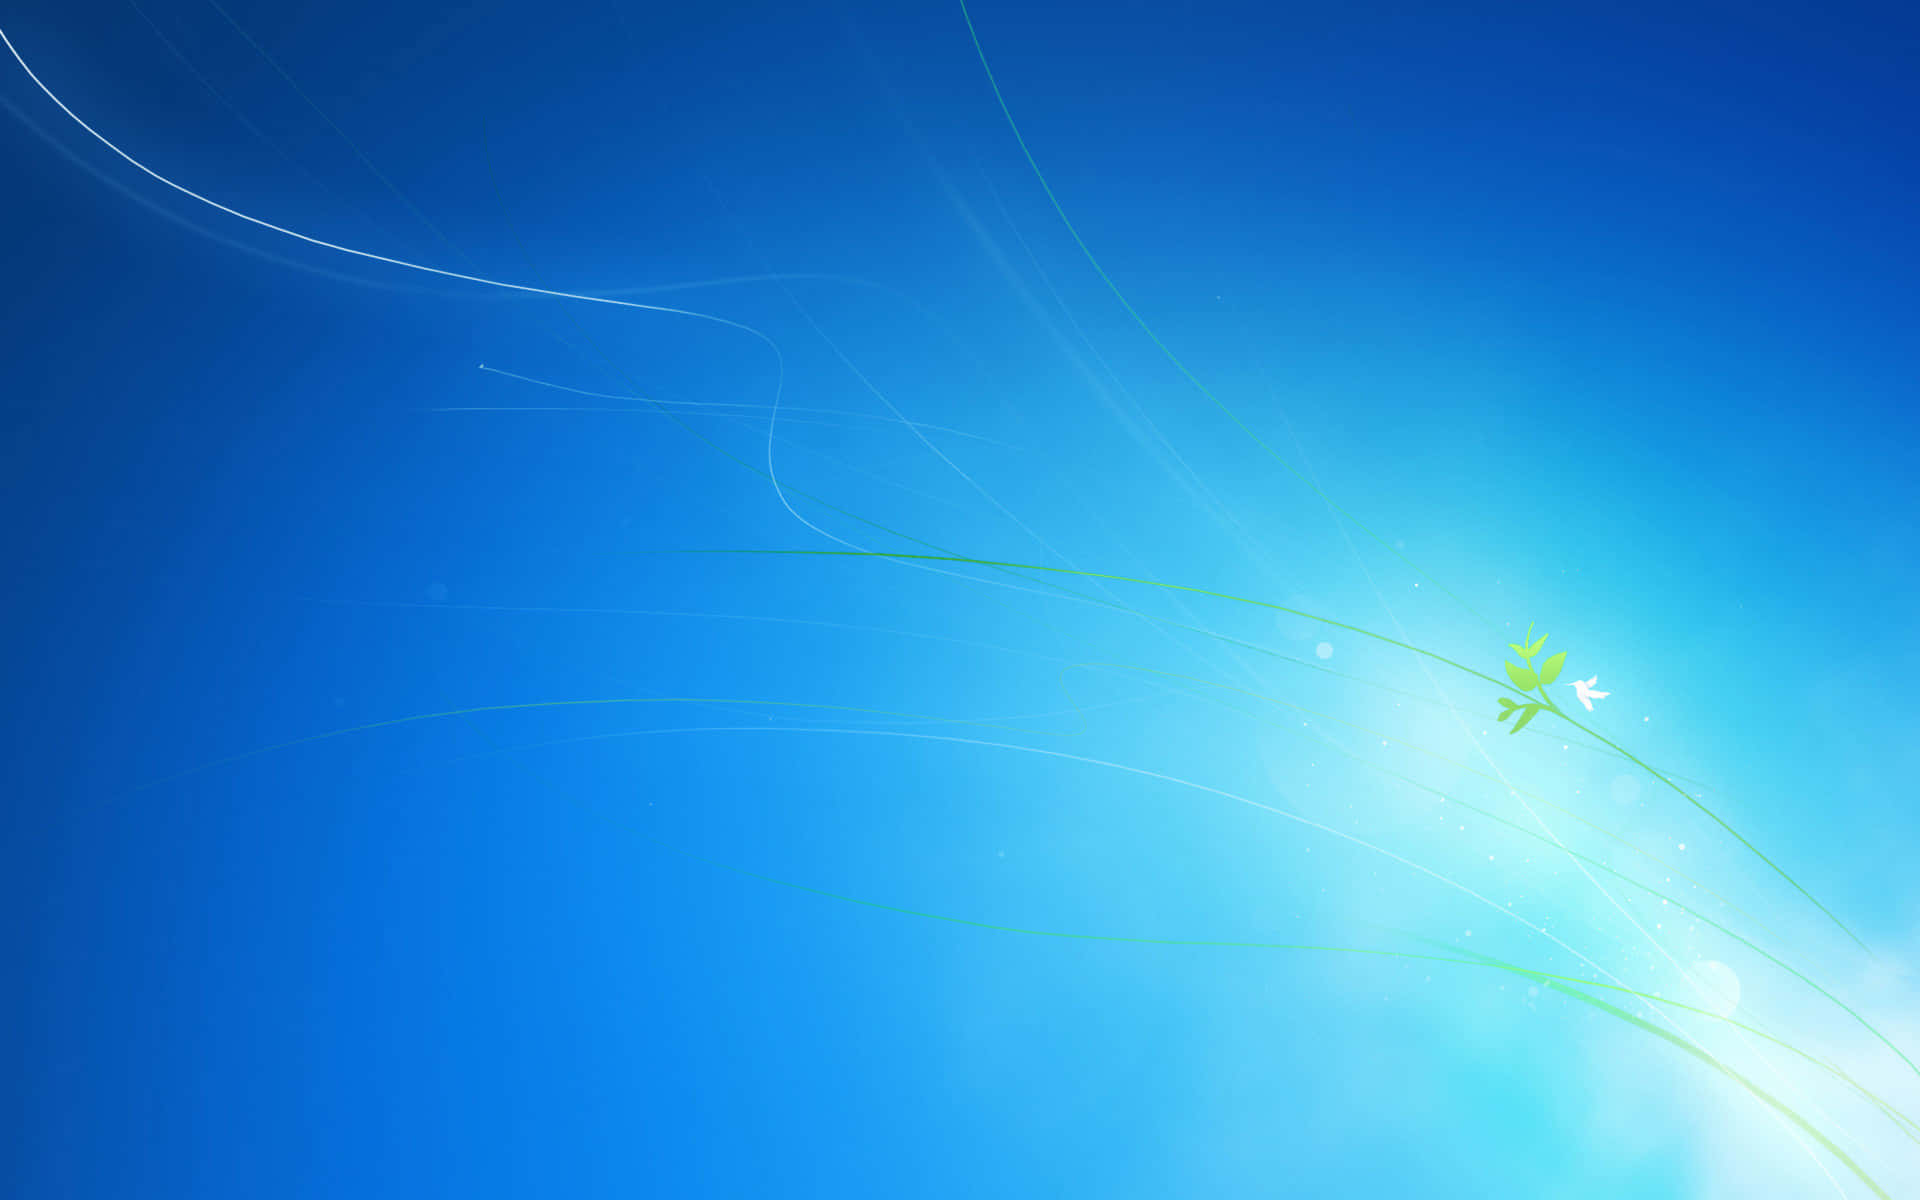 The Windows Default Background, Showing an Image of Radiant Light